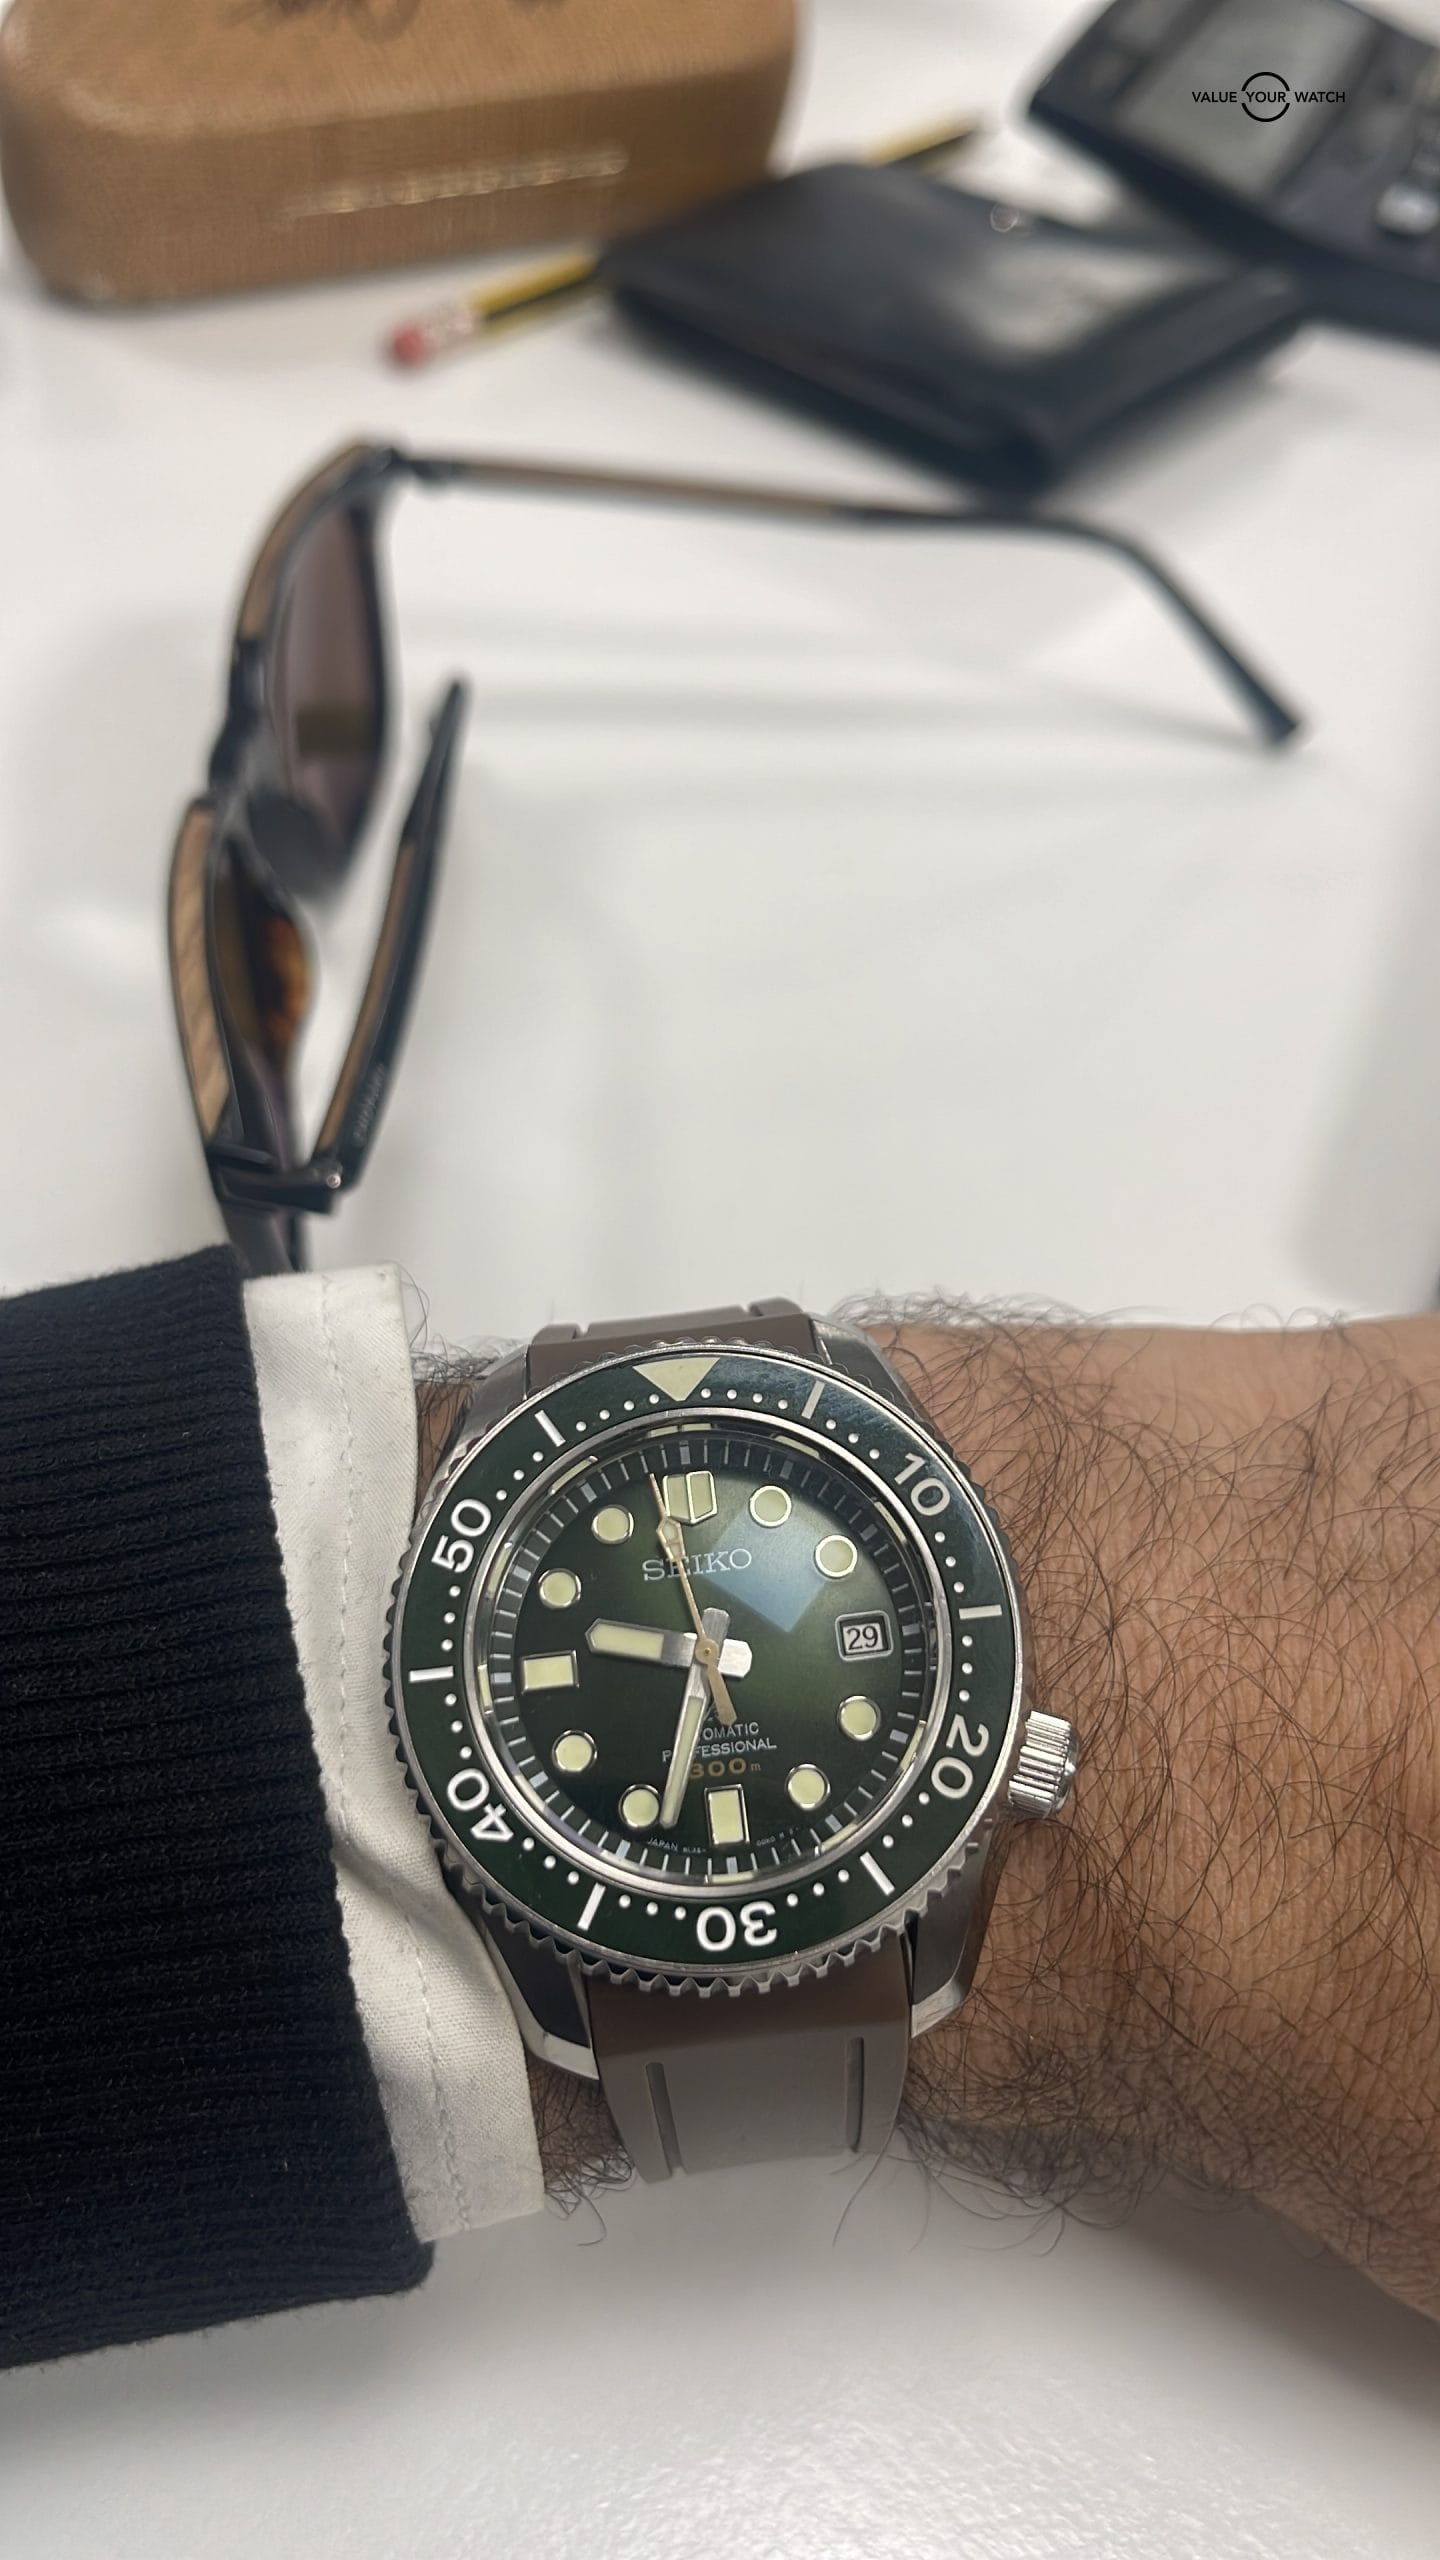 Seiko Marine Master SLA019 all green limited to 1986 : Value Your Watch